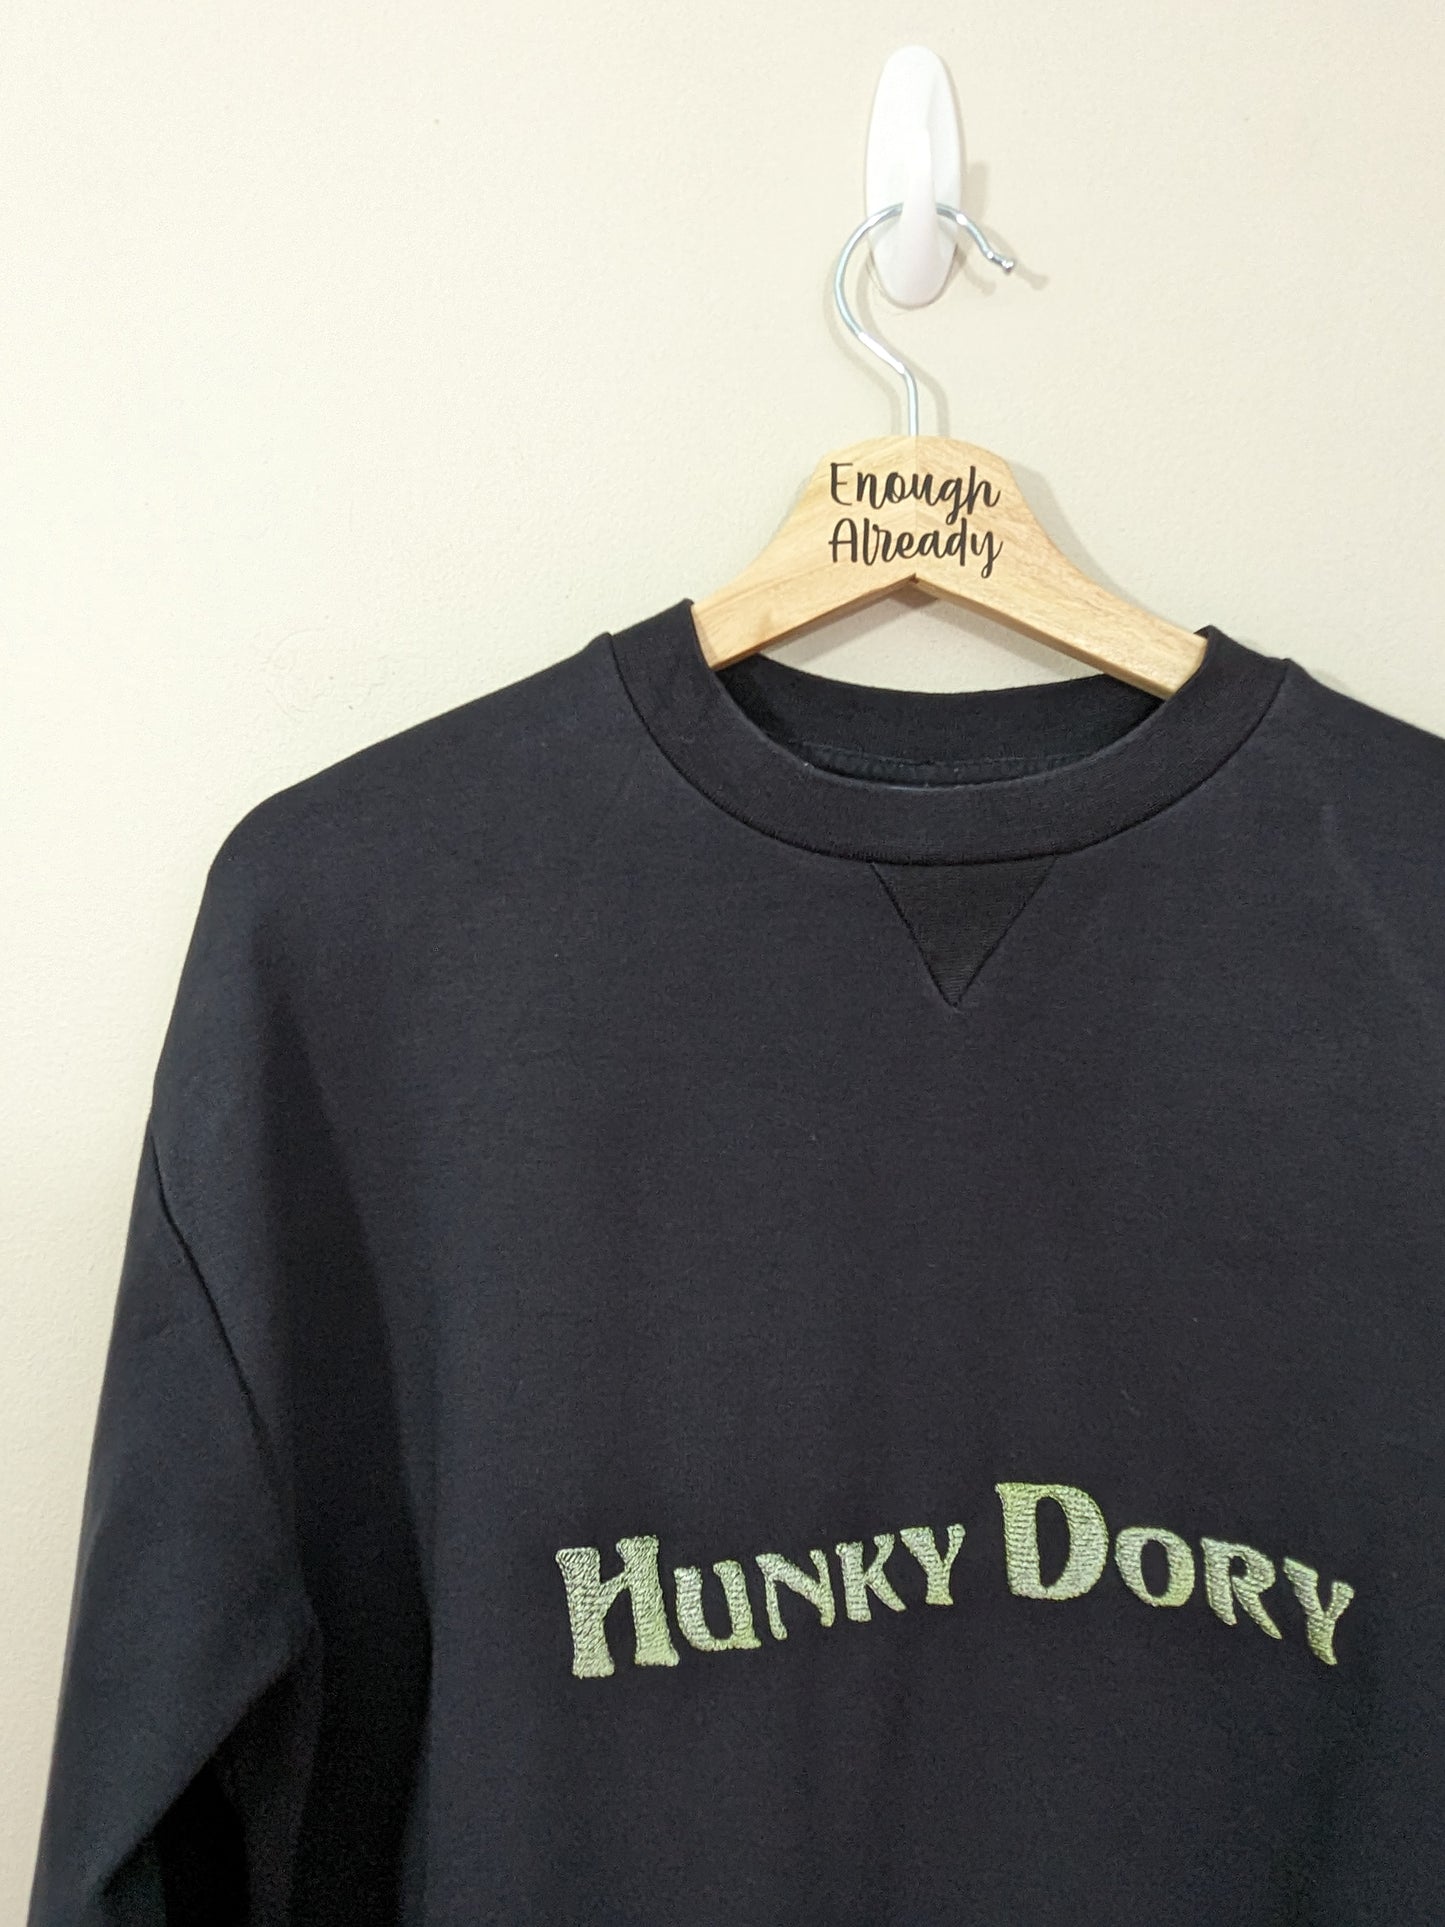 Size Women's Medium Reworked Black Sweatshirt with Embroidered Hunky Dory / David Bowie Inspired Bold Design - One of a Kind